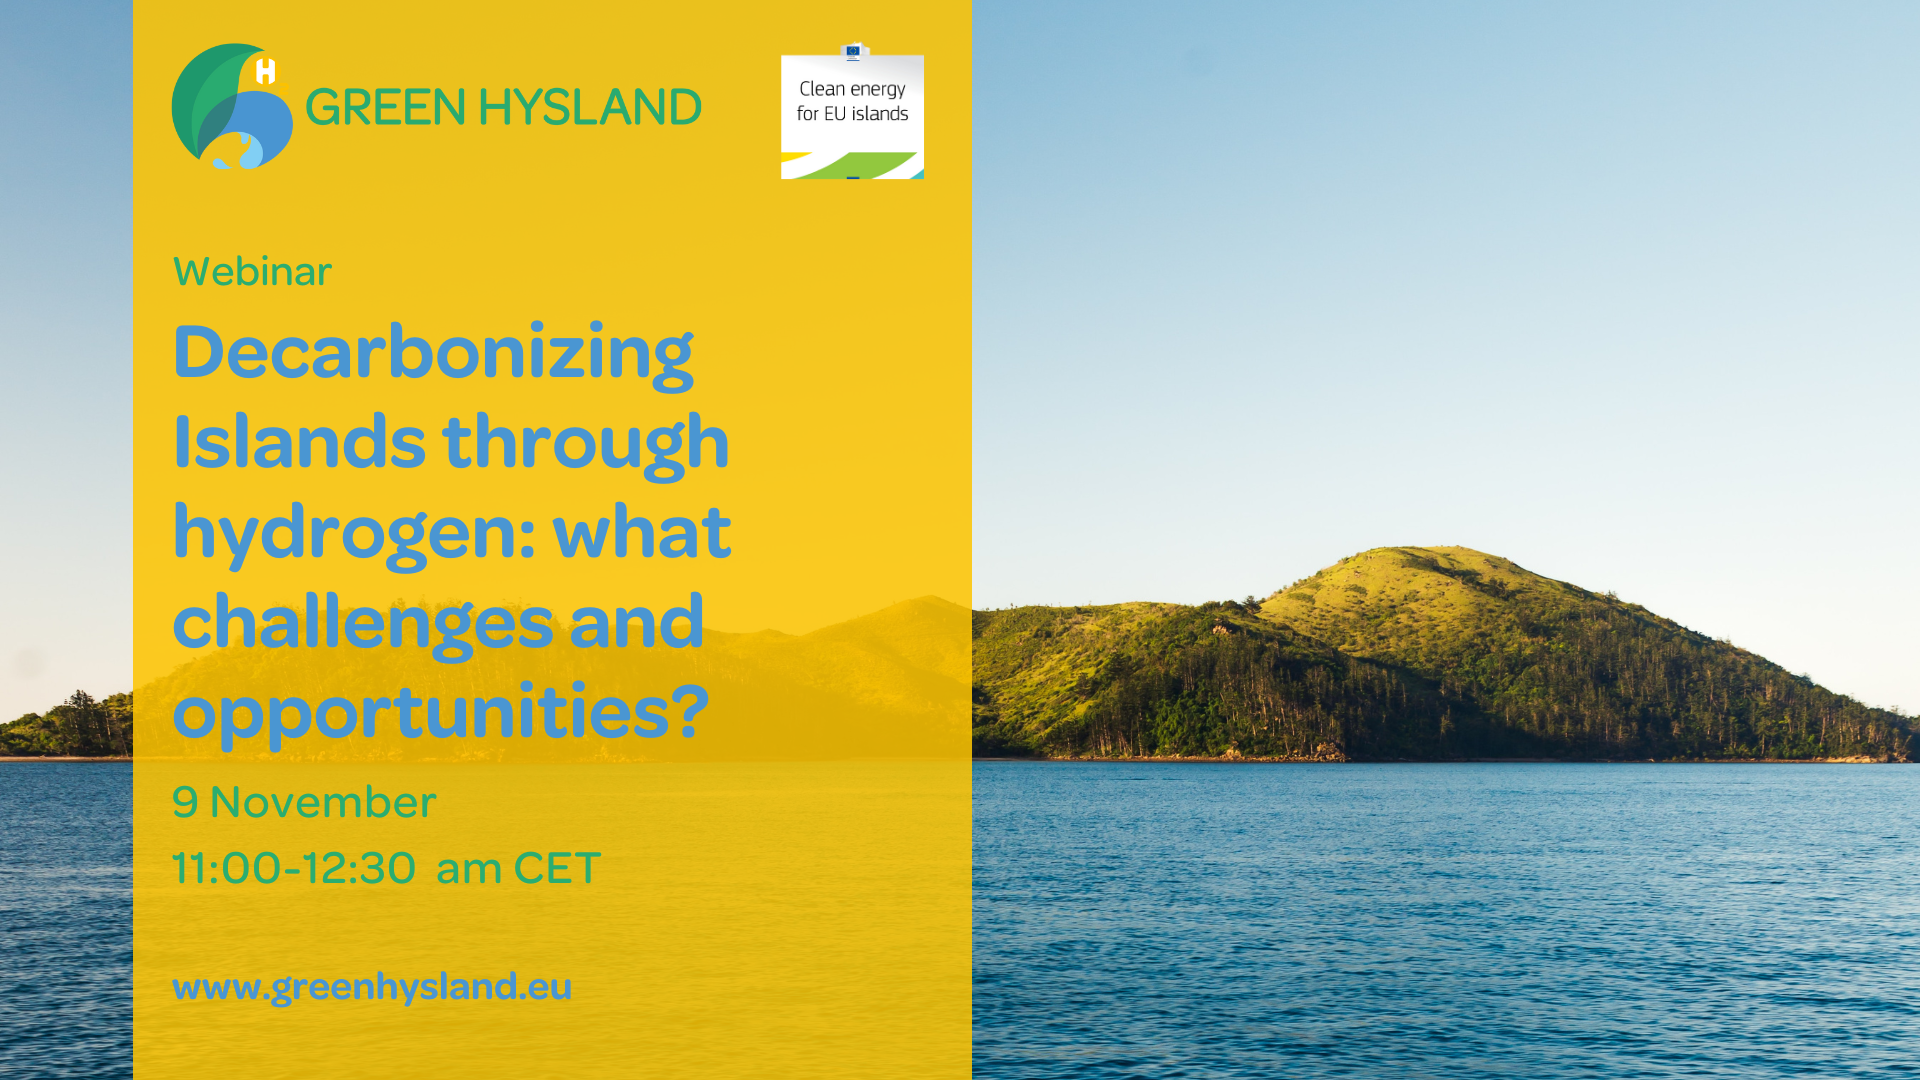 Decarbonizing Islands through hydrogen: what challenges and opportunities?